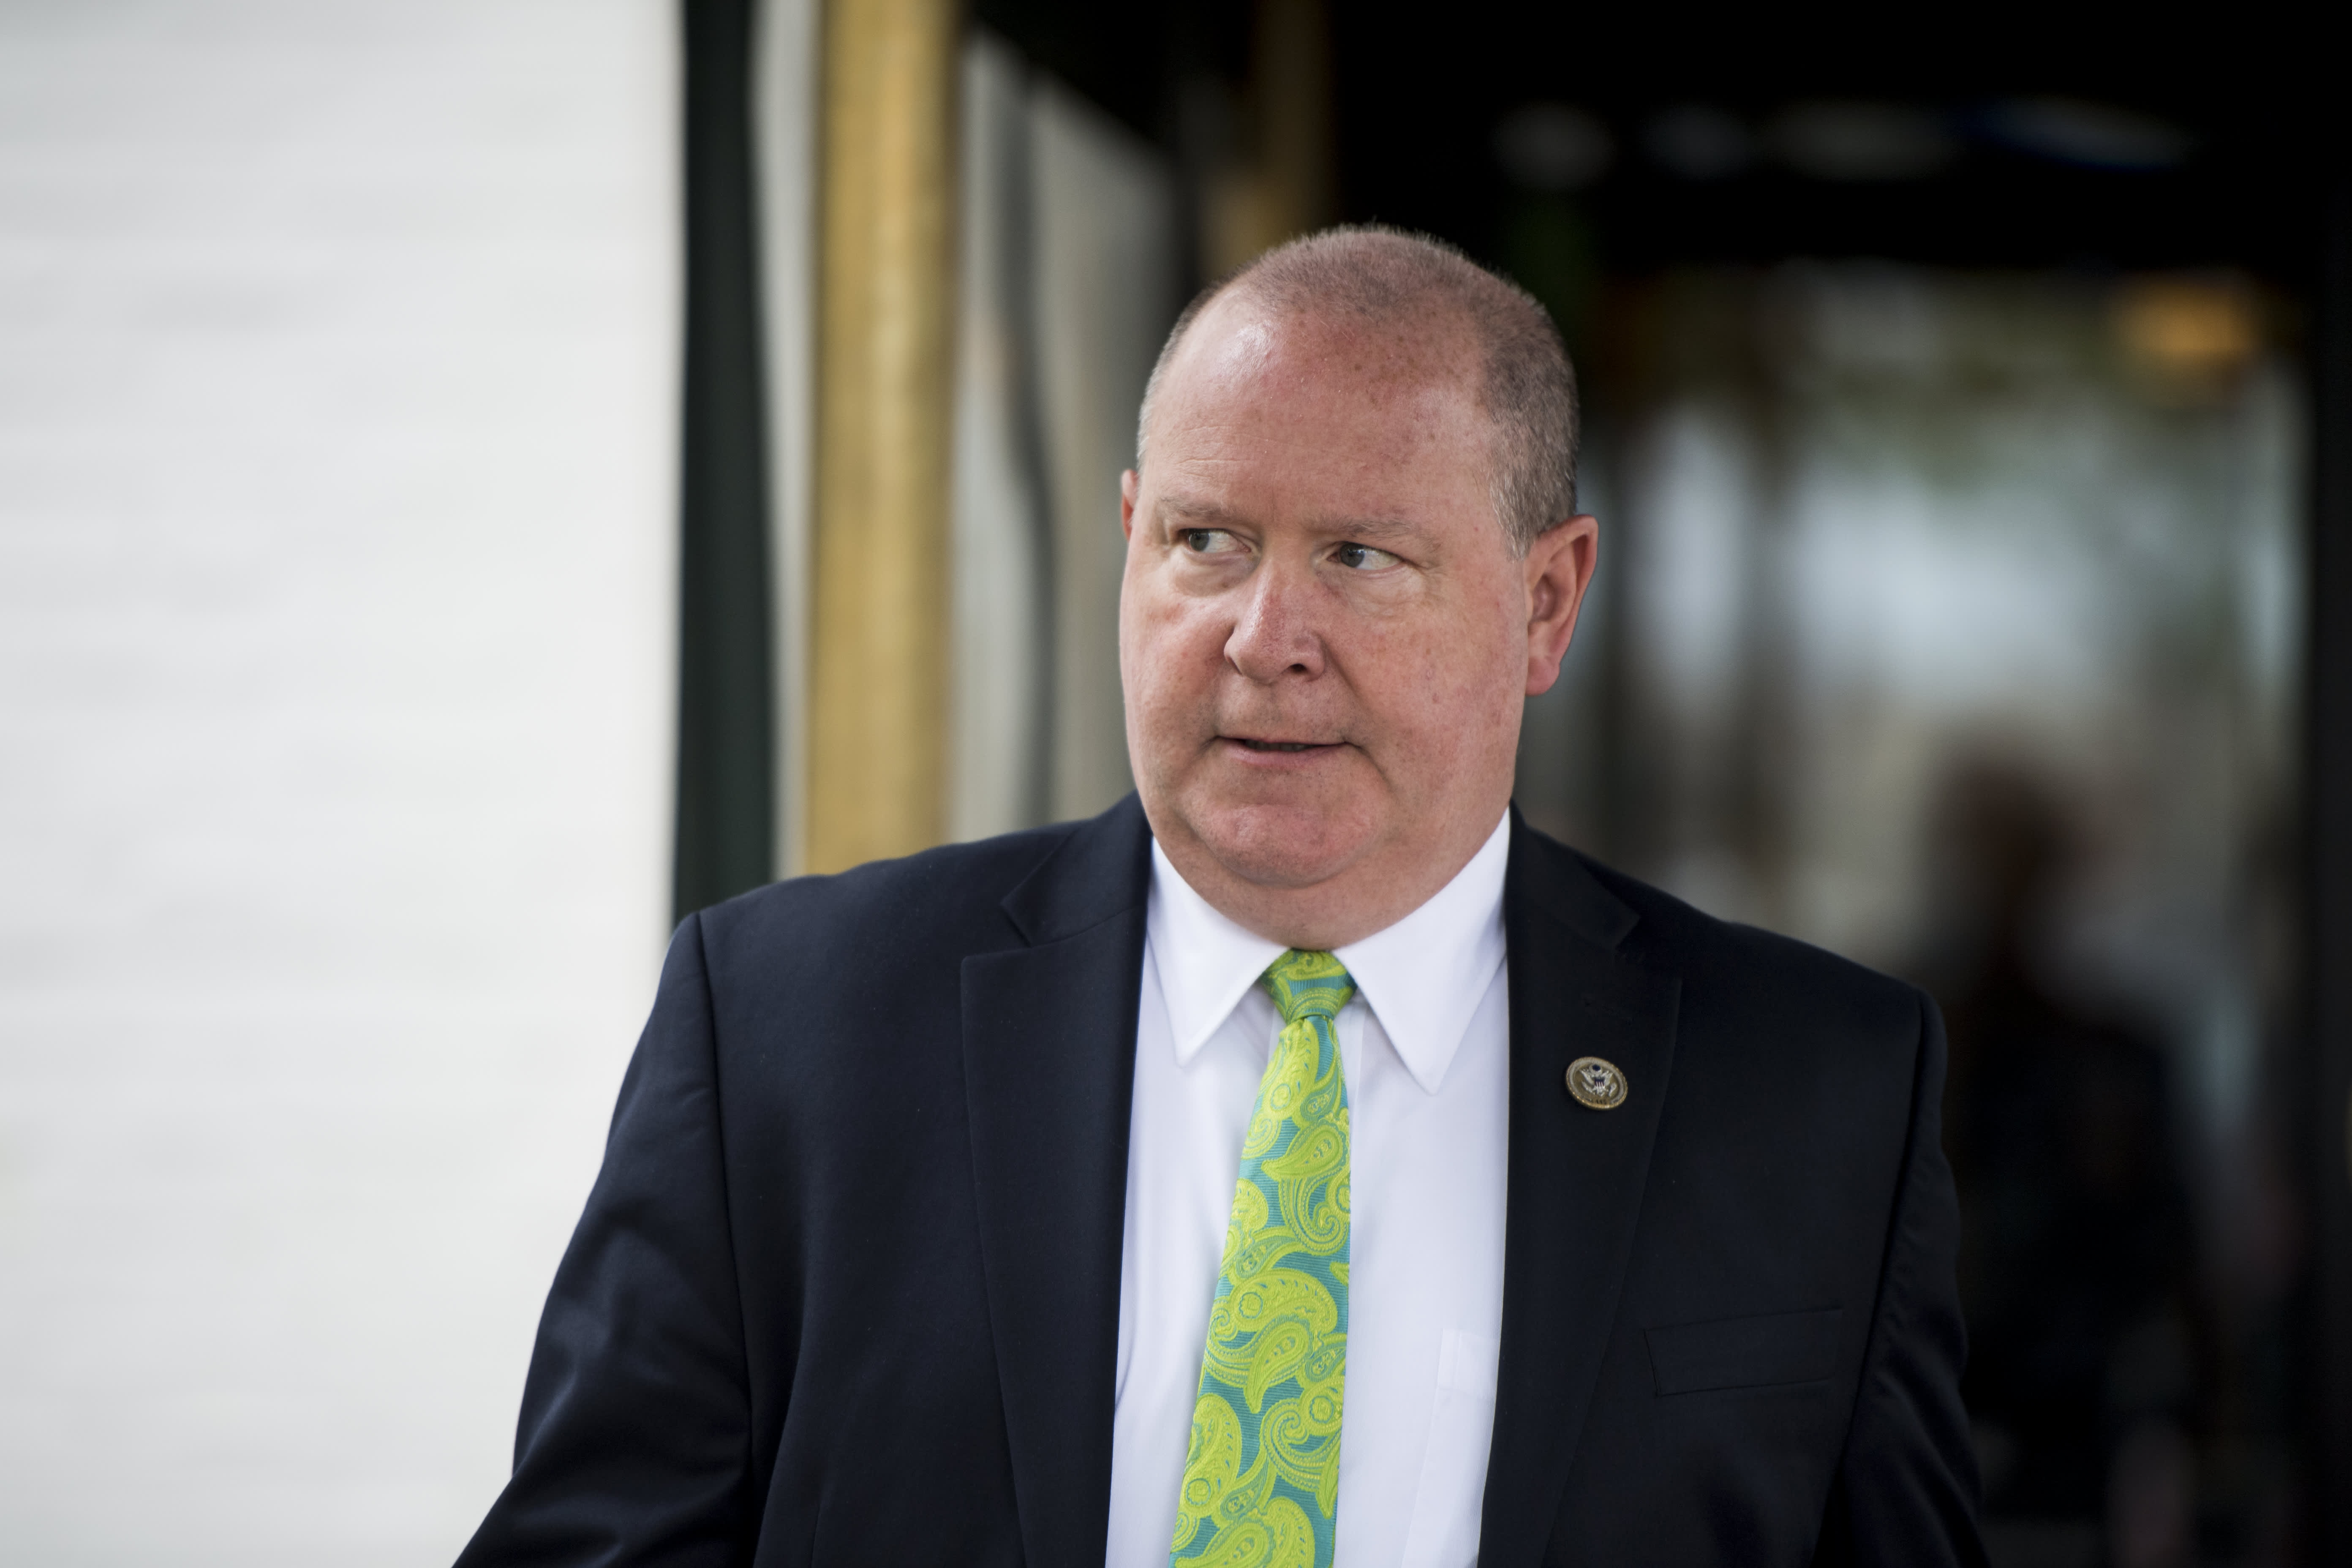 GOP Rep. Larry Bucshon is the second House lawmaker to disclose Trump SPAC stock purchase